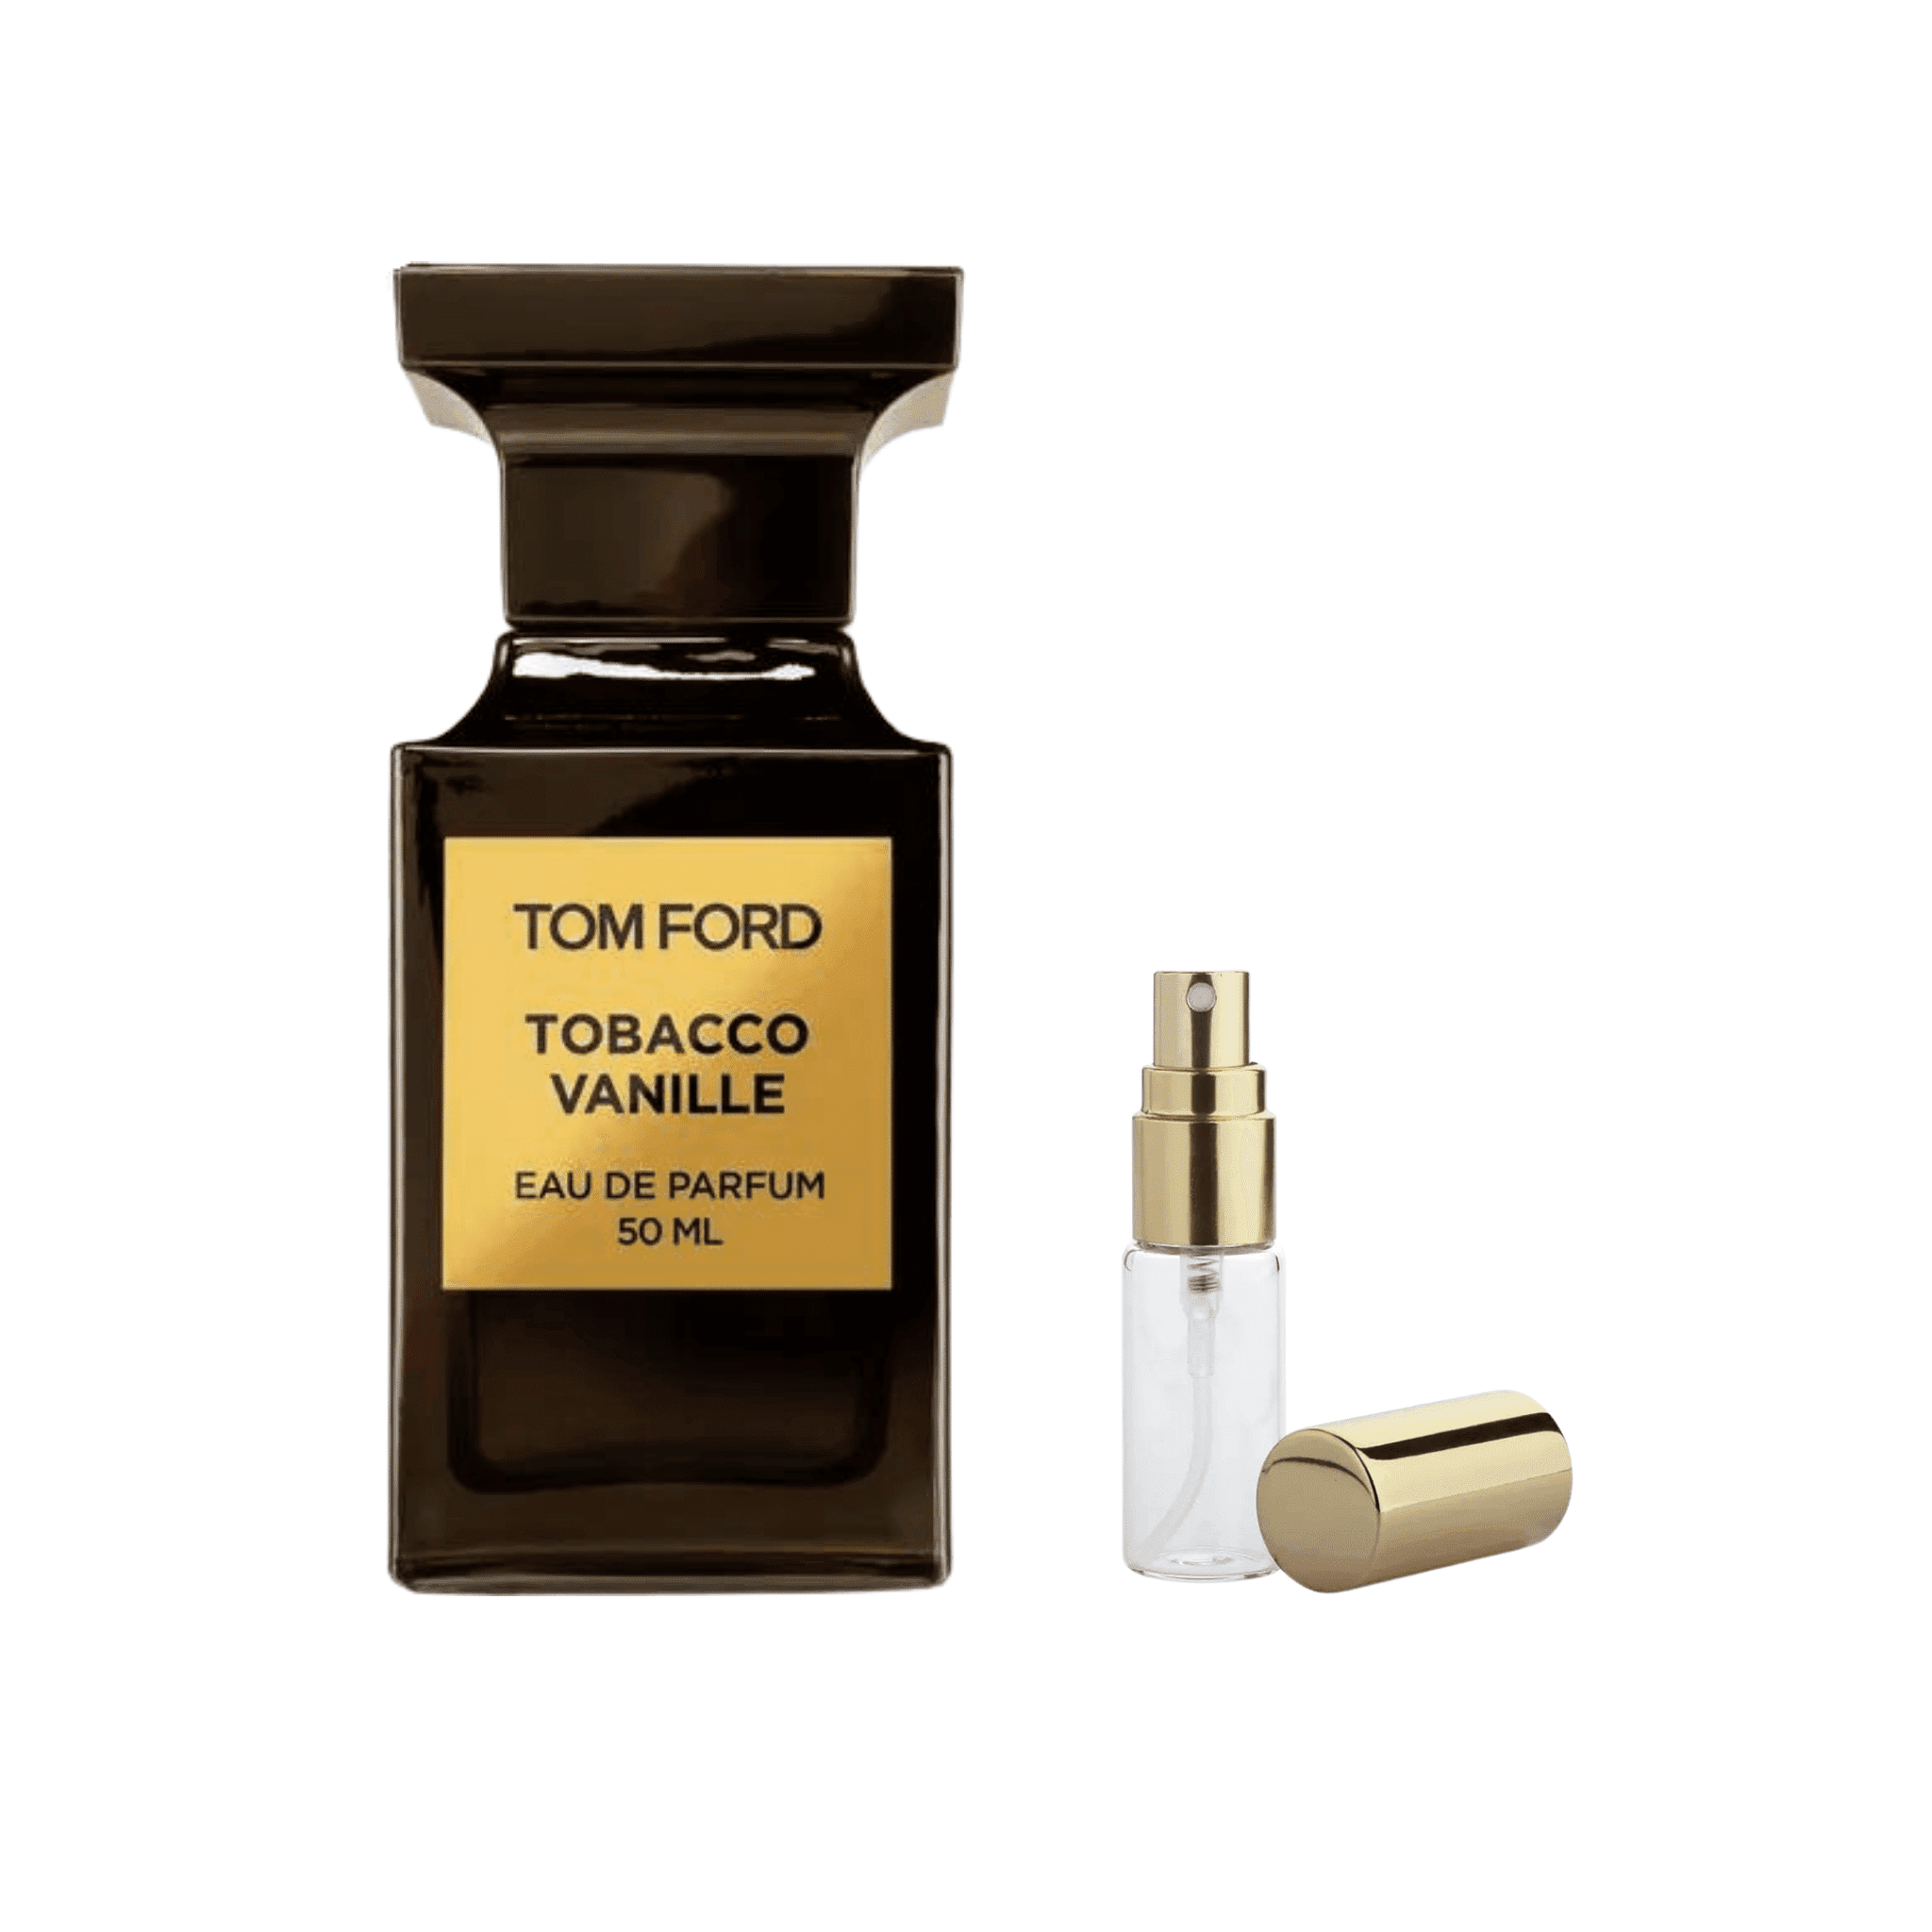 Tobacco vanille decant travel size 